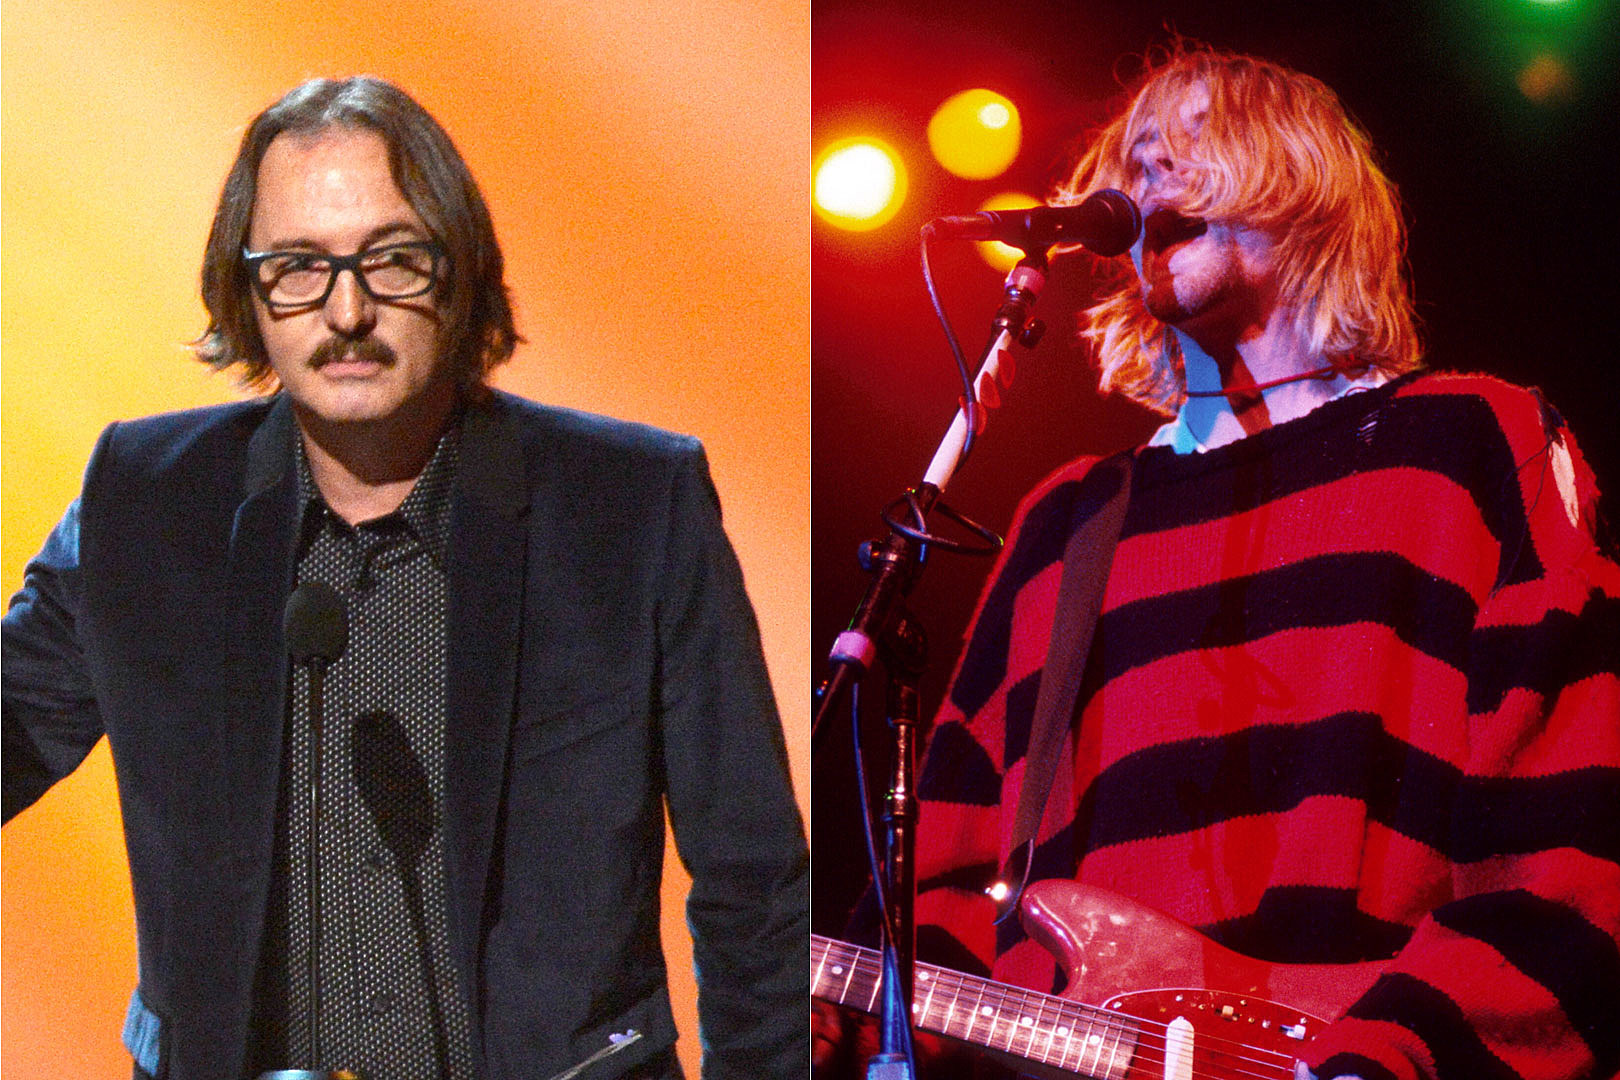 Butch Vig a Record producer and Garbage member with Nirvana's Kurt Cobain